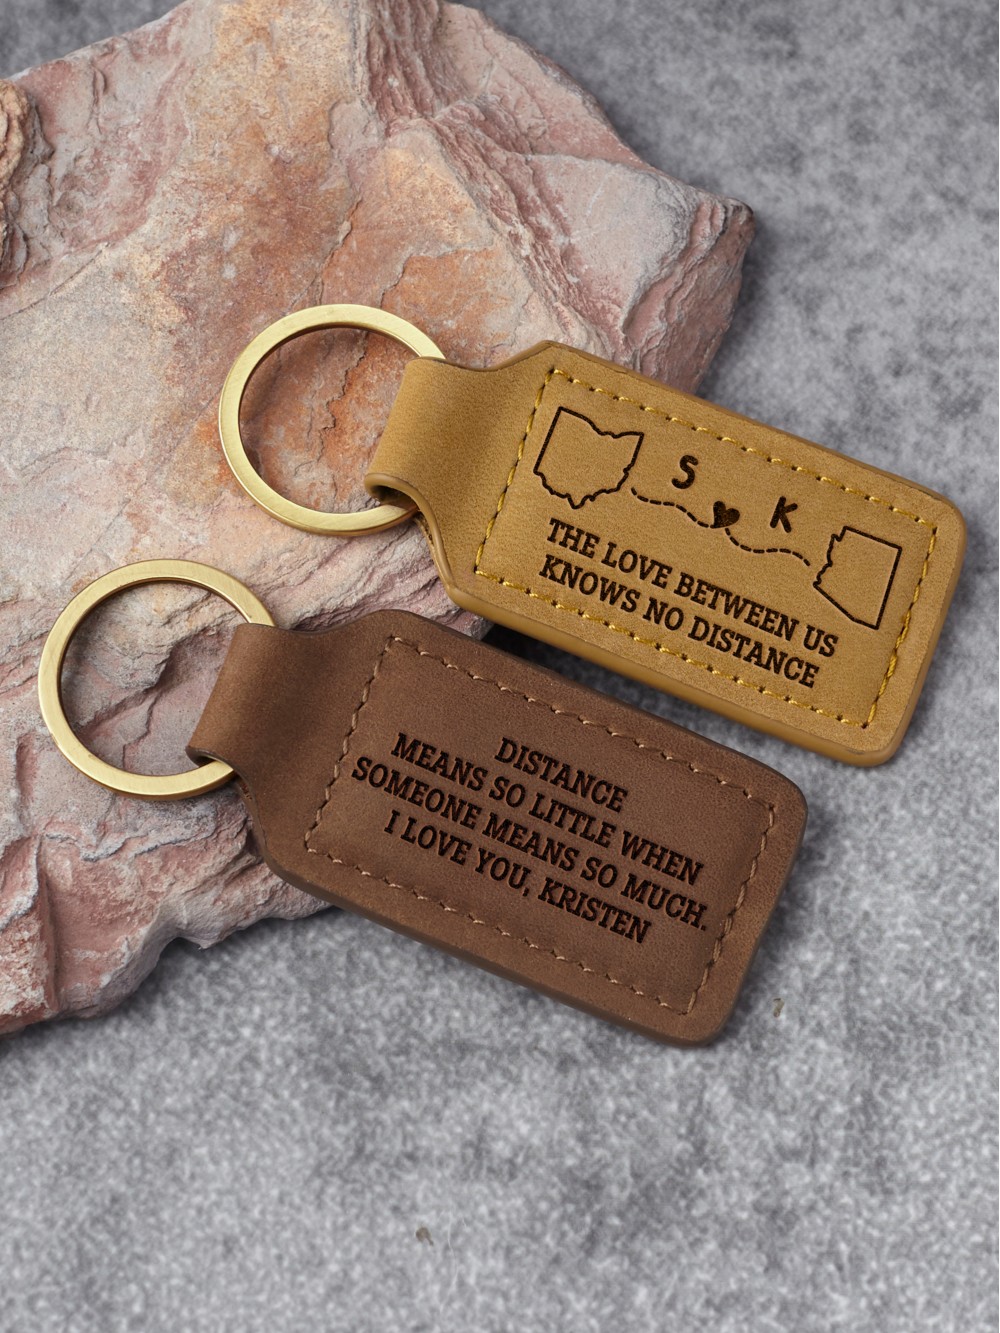 Long Distance Relationship Keychain - Leather